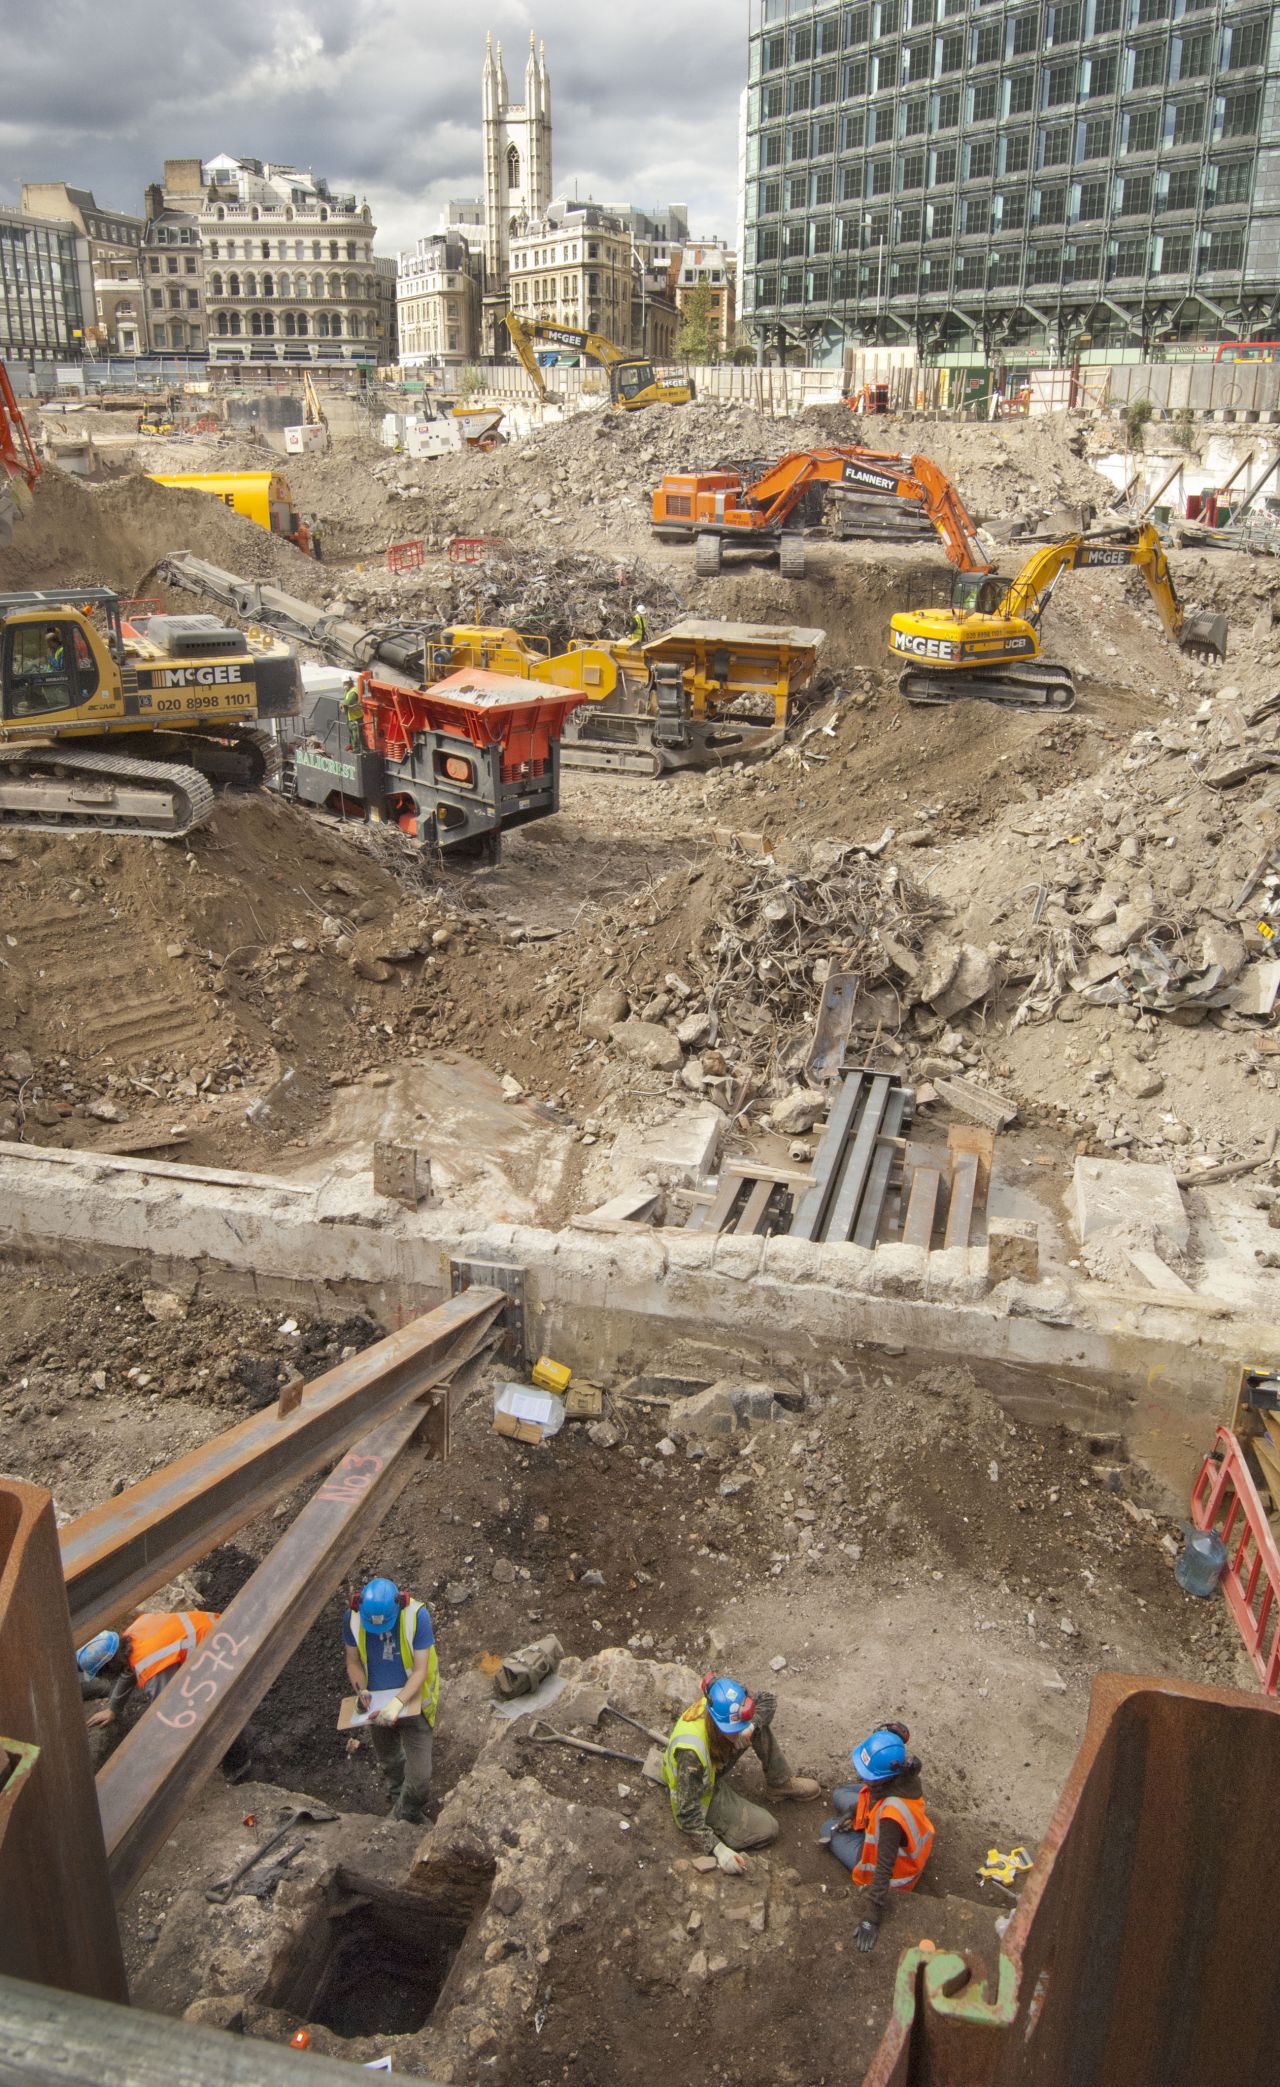 View of excavations at Bloomberg Place, which is currently the largest commercially funded development project in the world. The site embraces the longest stretch of the Roman Walbrook left in the City.